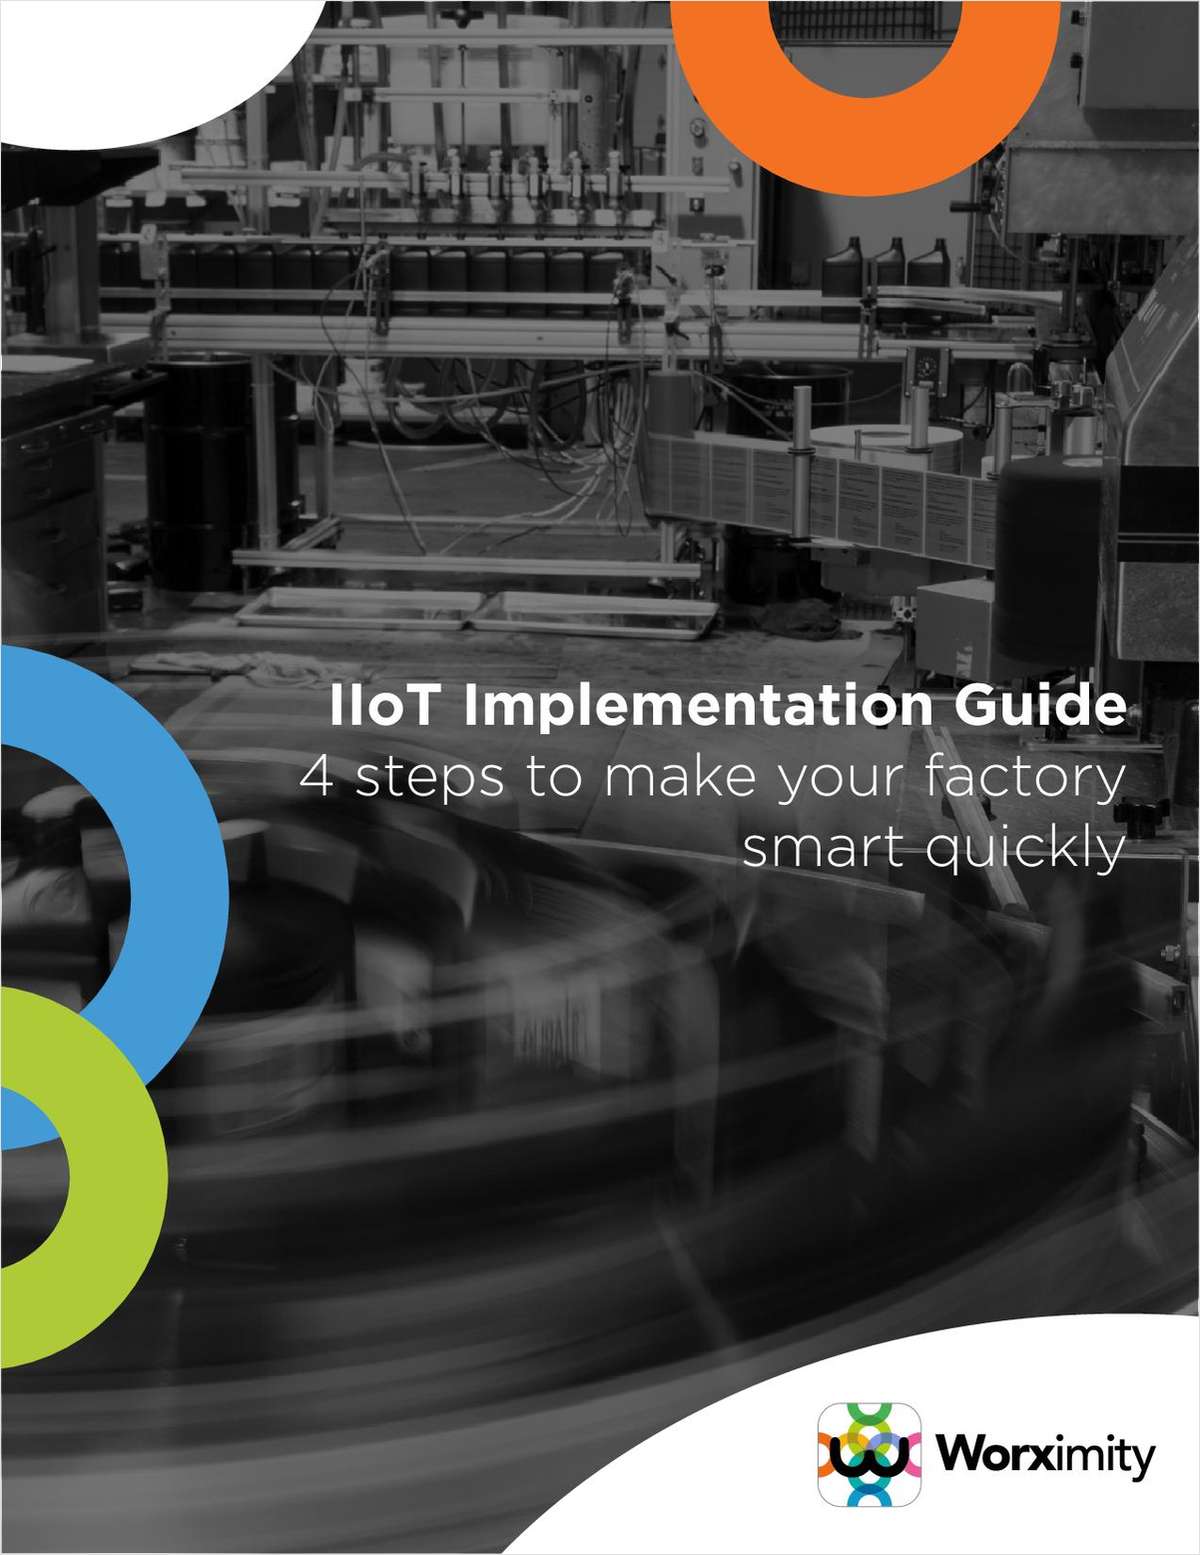 IIoT Guide for Food Manufacturers